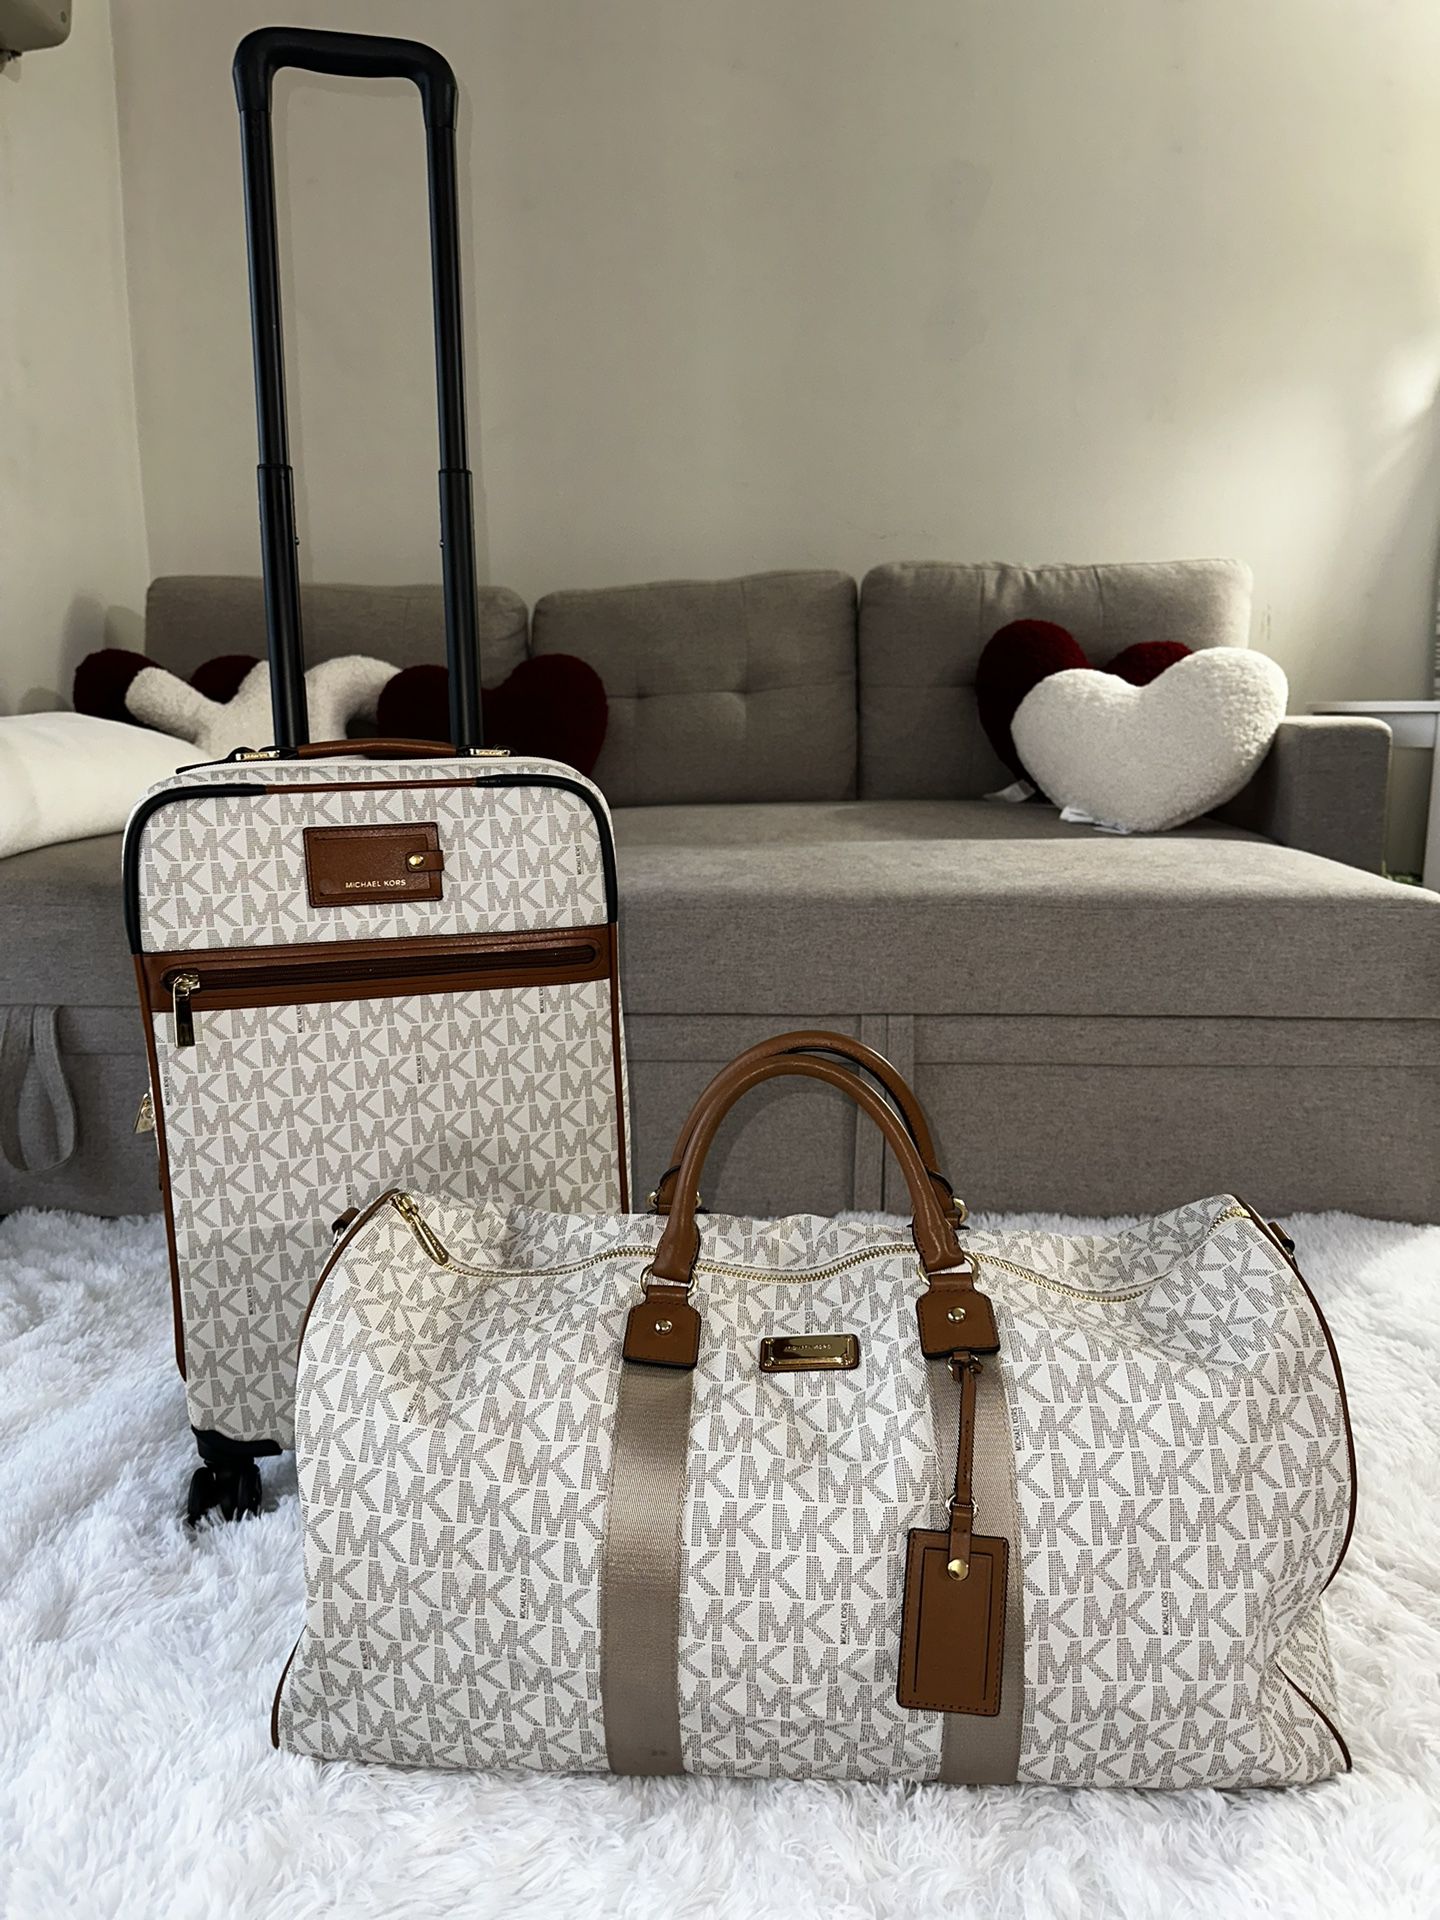 Michael Kors Trolley Carry On Suitcase and Matching Weekender Duffle Bag